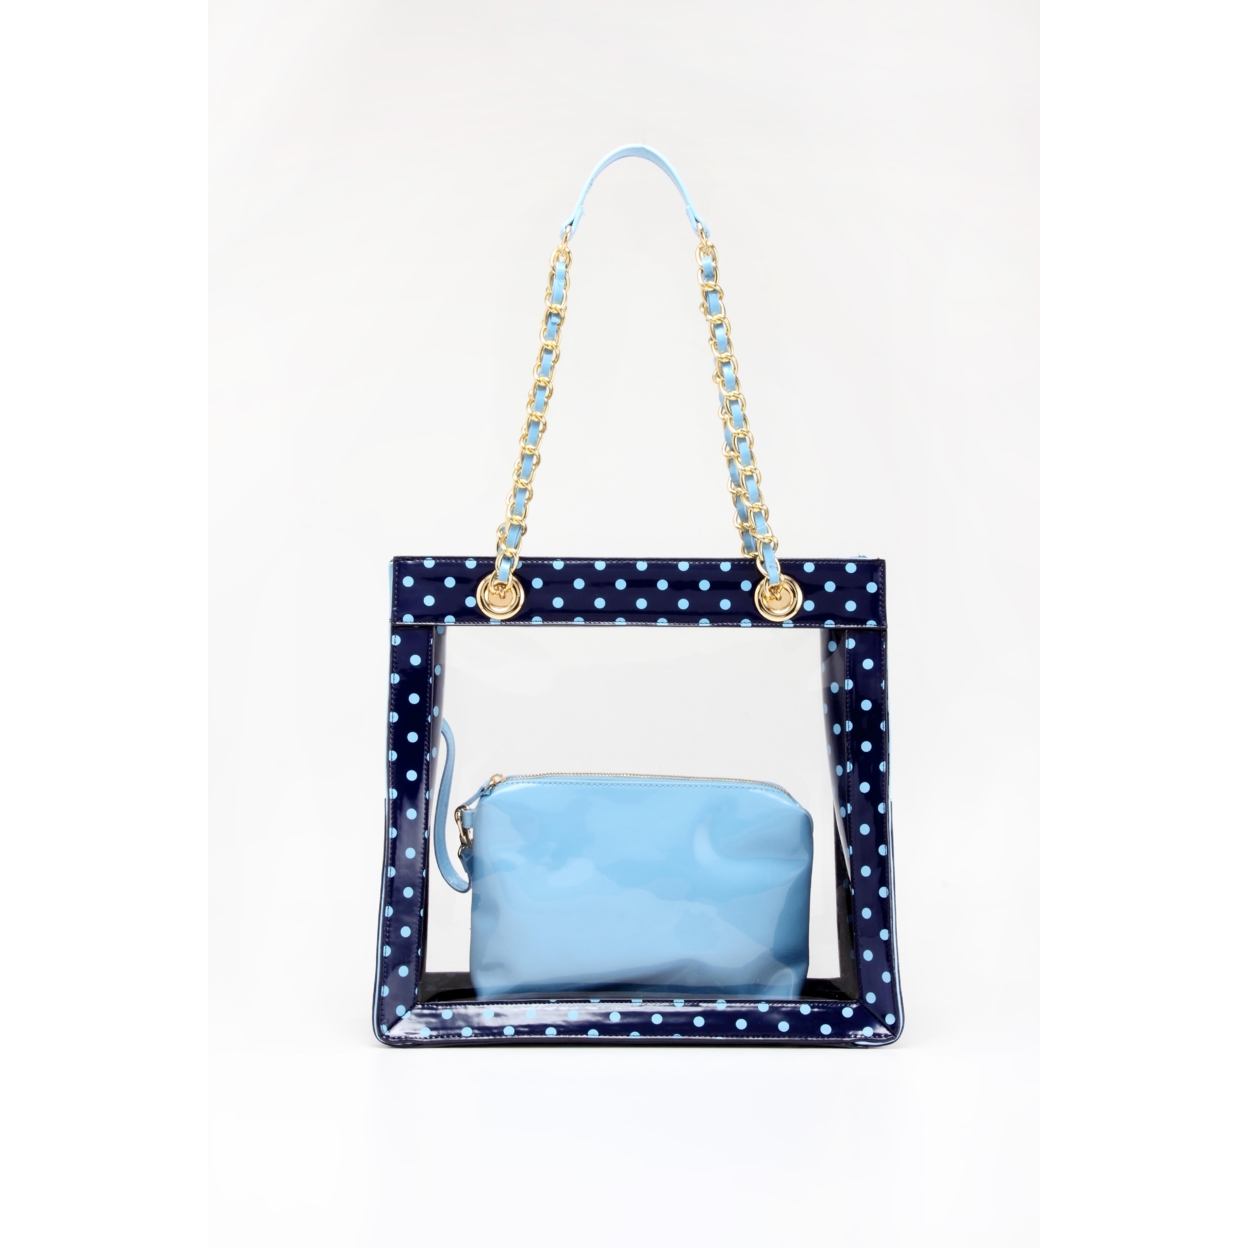 SCORE! Andrea Large Clear Designer Tote For School, Work, Travel - Navy Blue And Light Blue